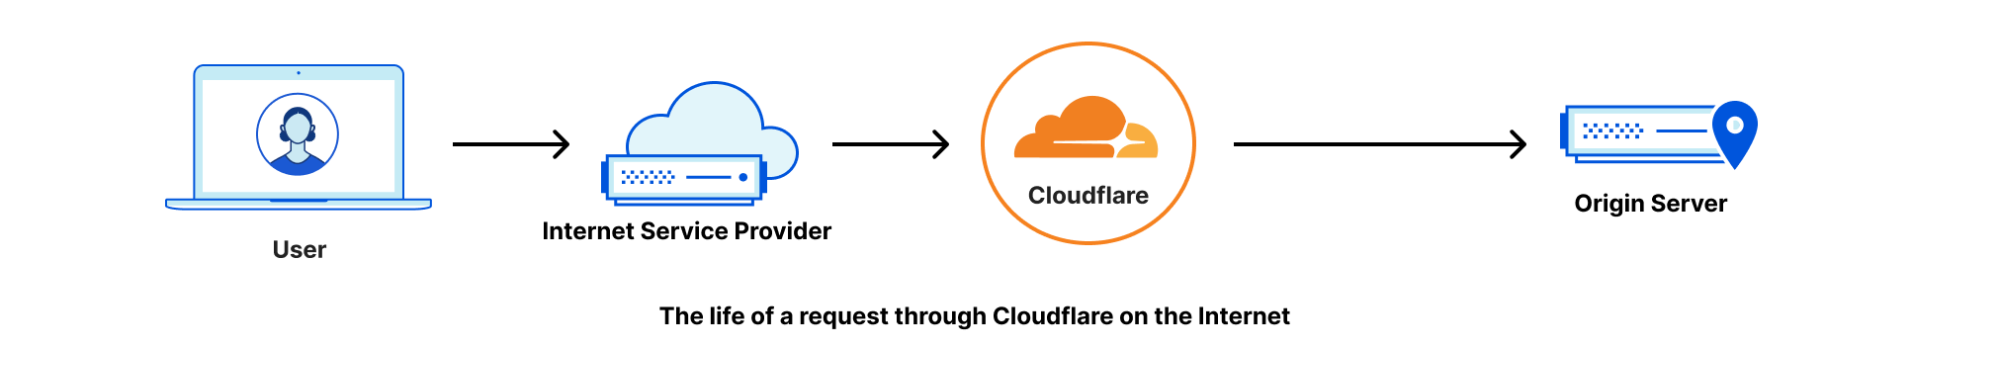 life of a request through Cloudflare on the Internet